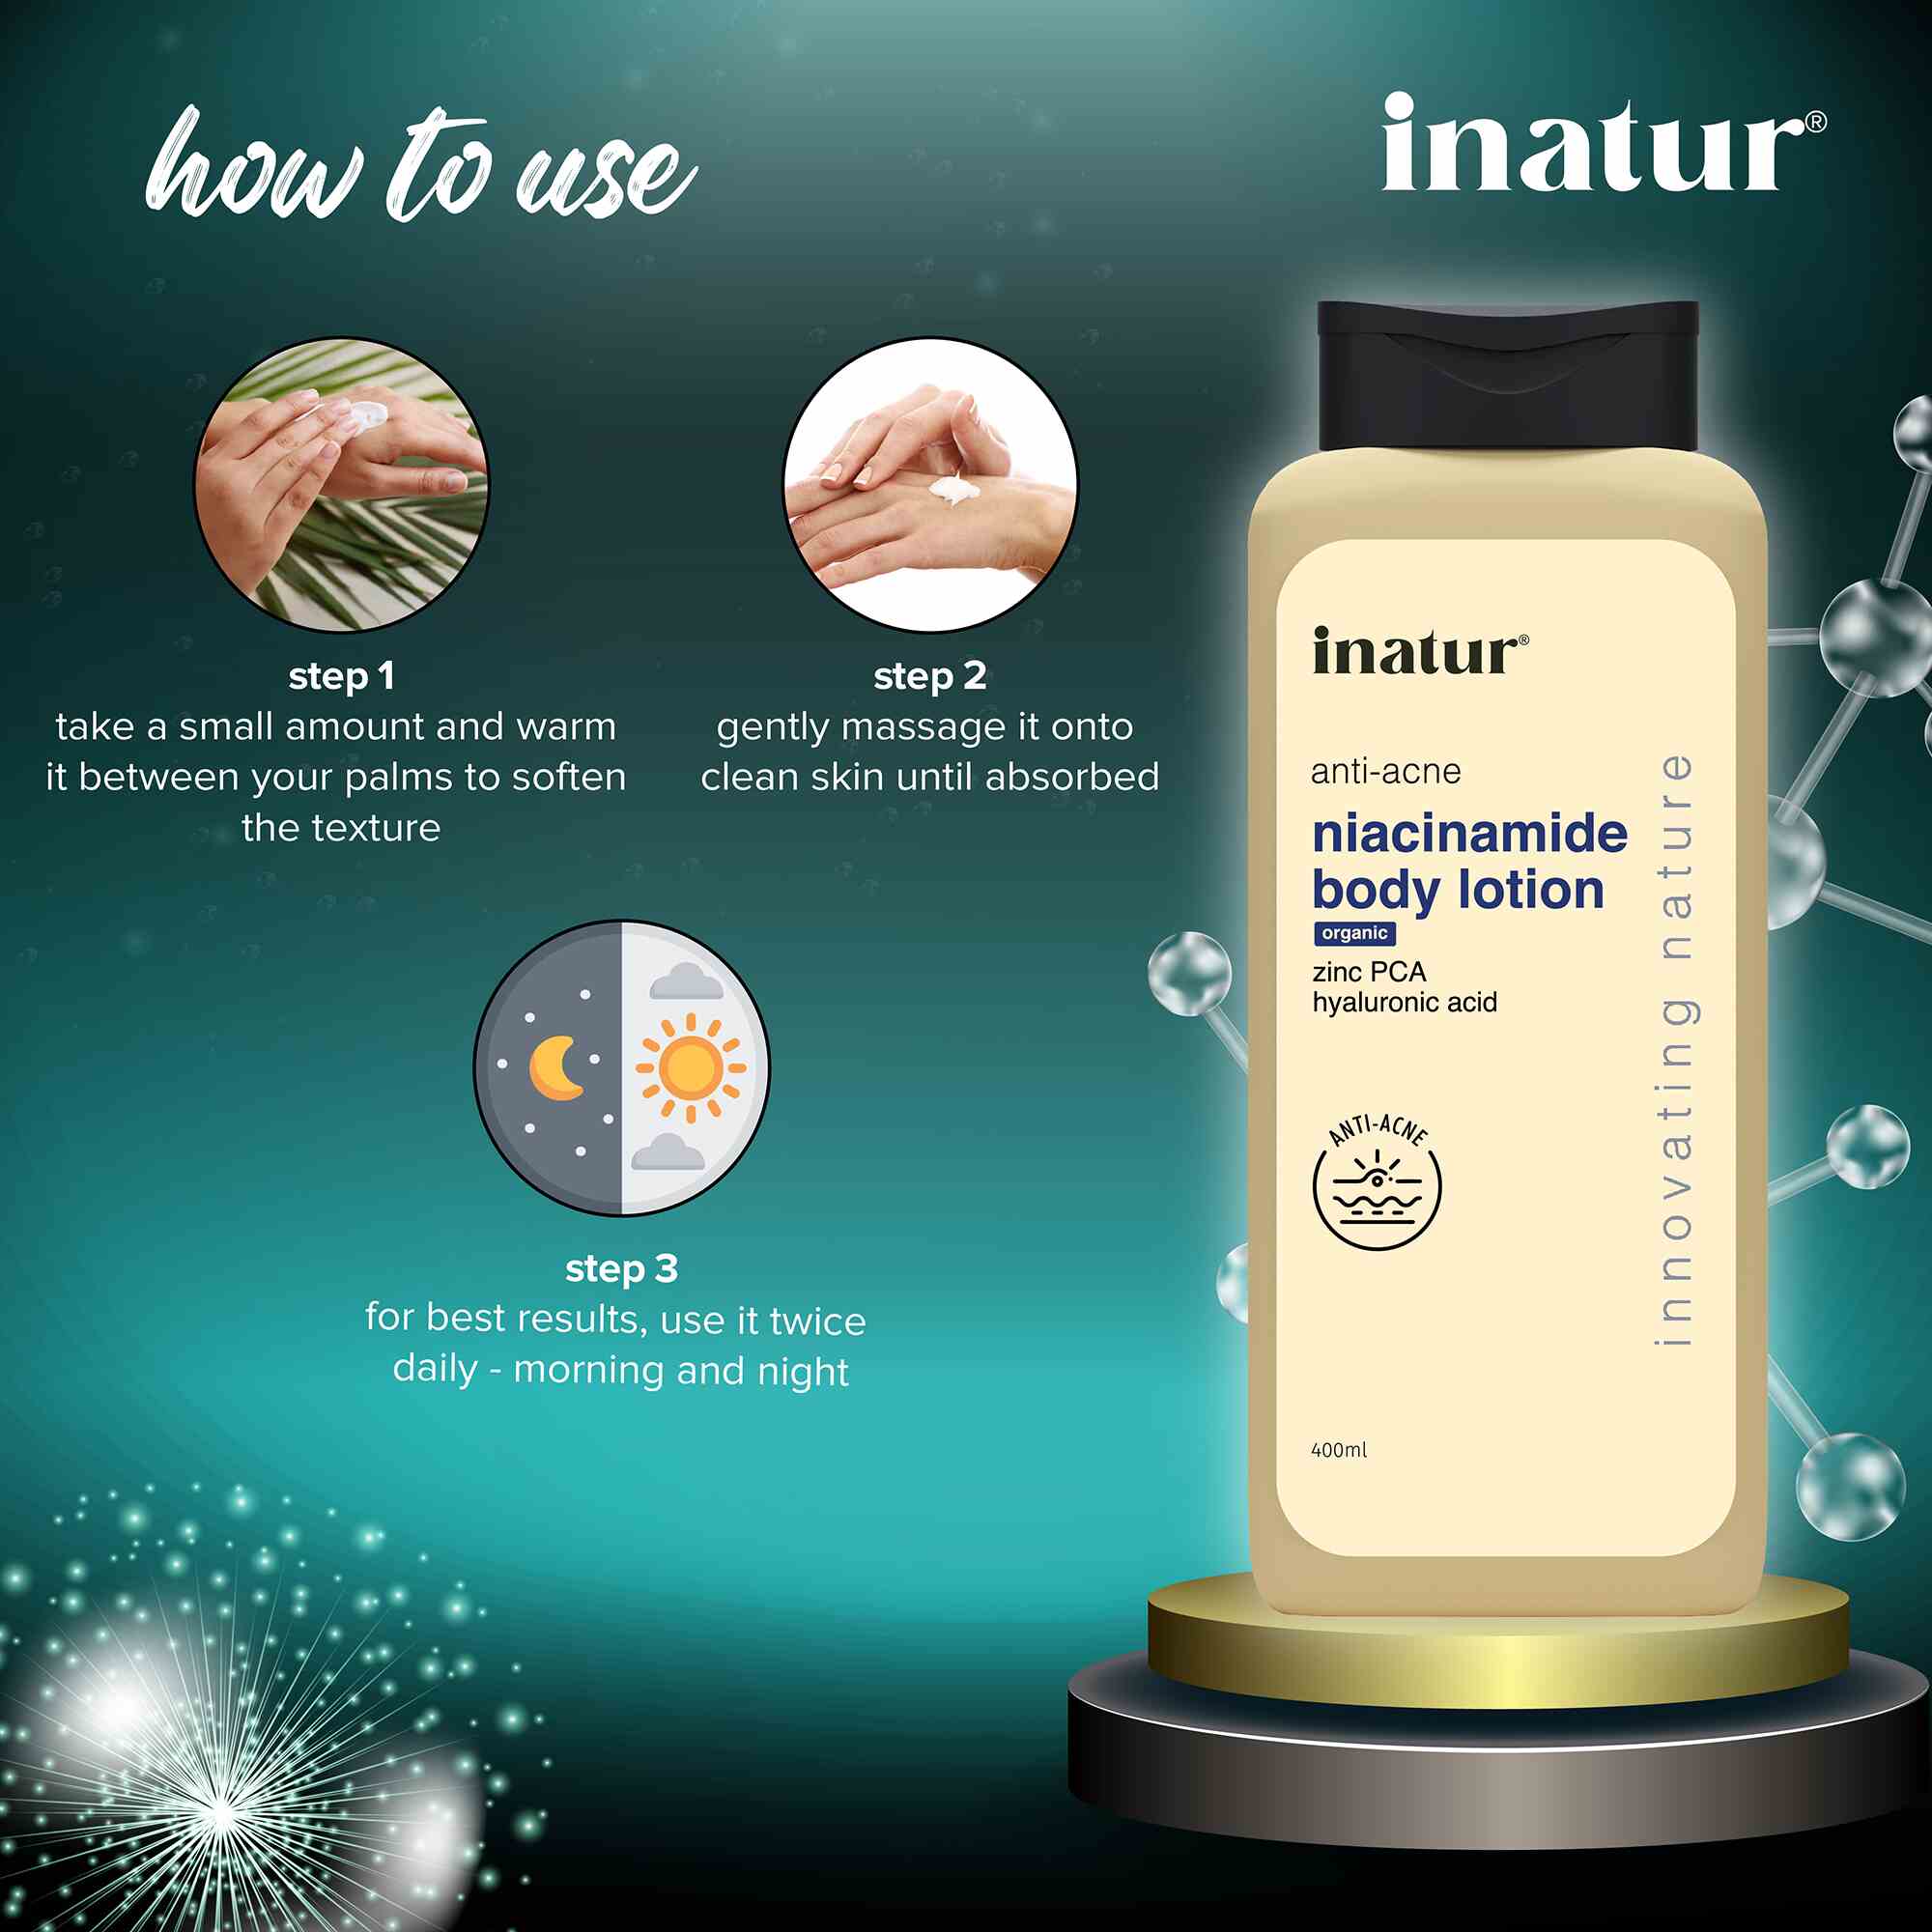 how to use inatur niacinamide body lotion